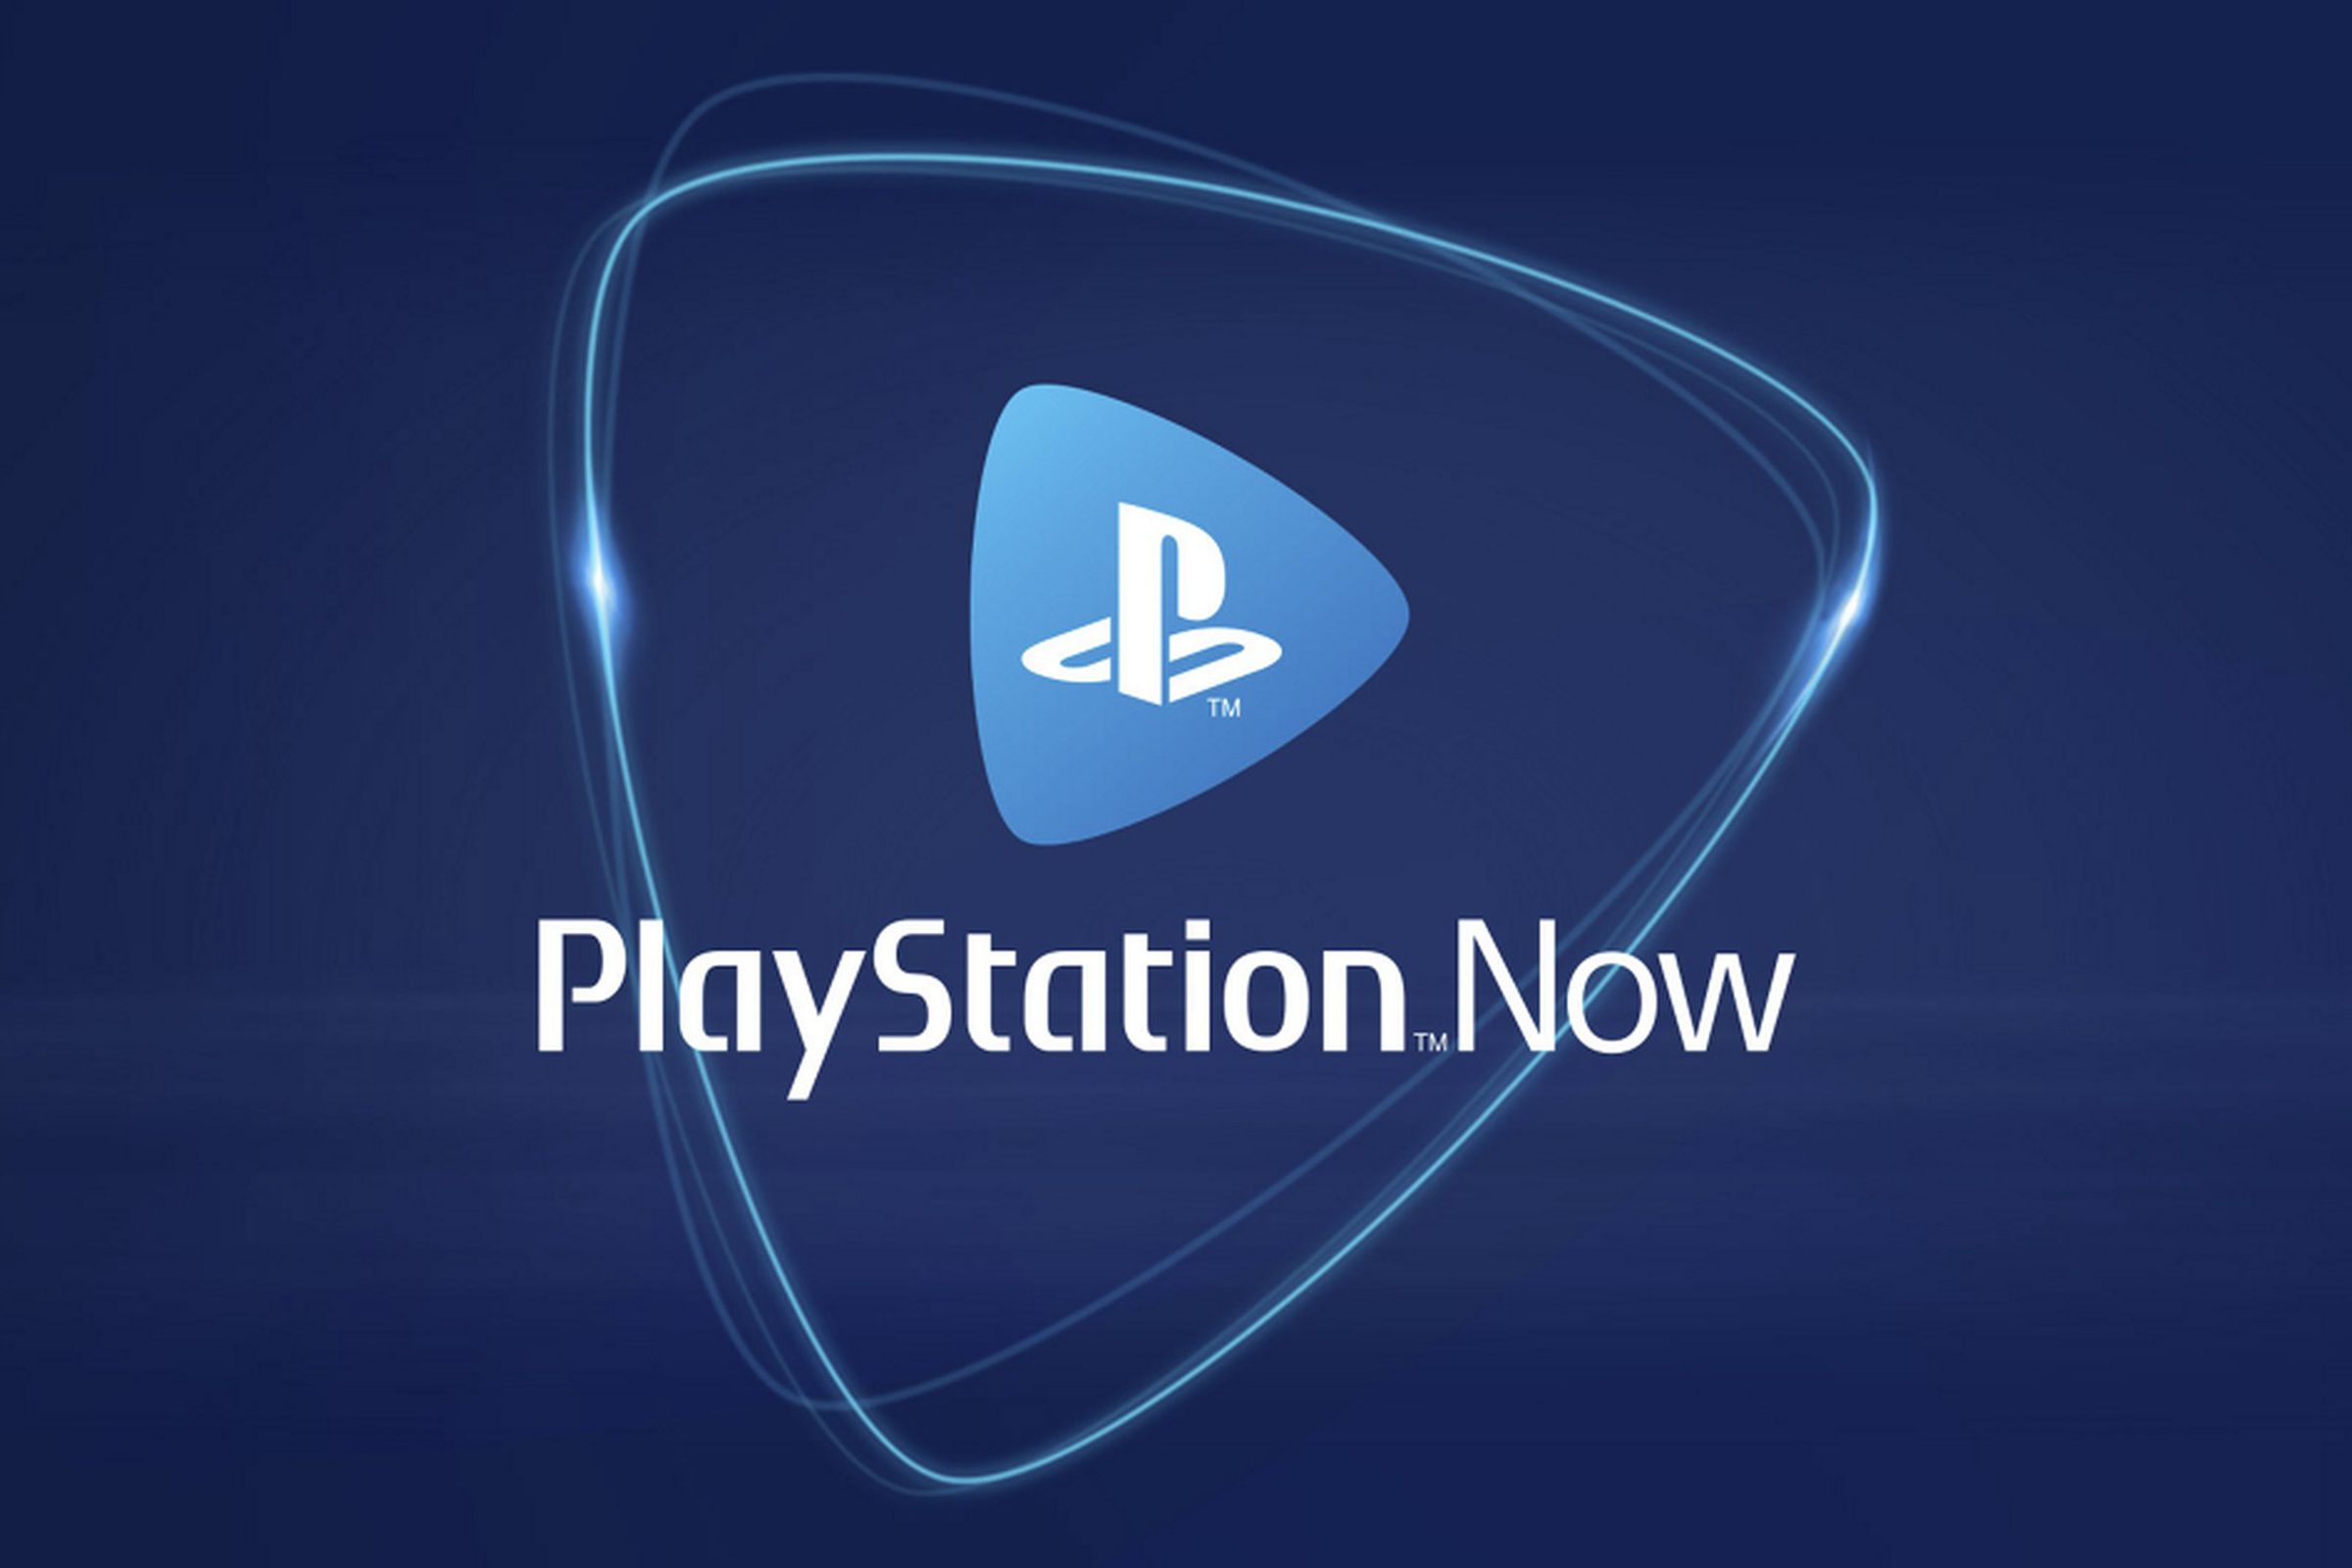 The logo for PlayStation Now,